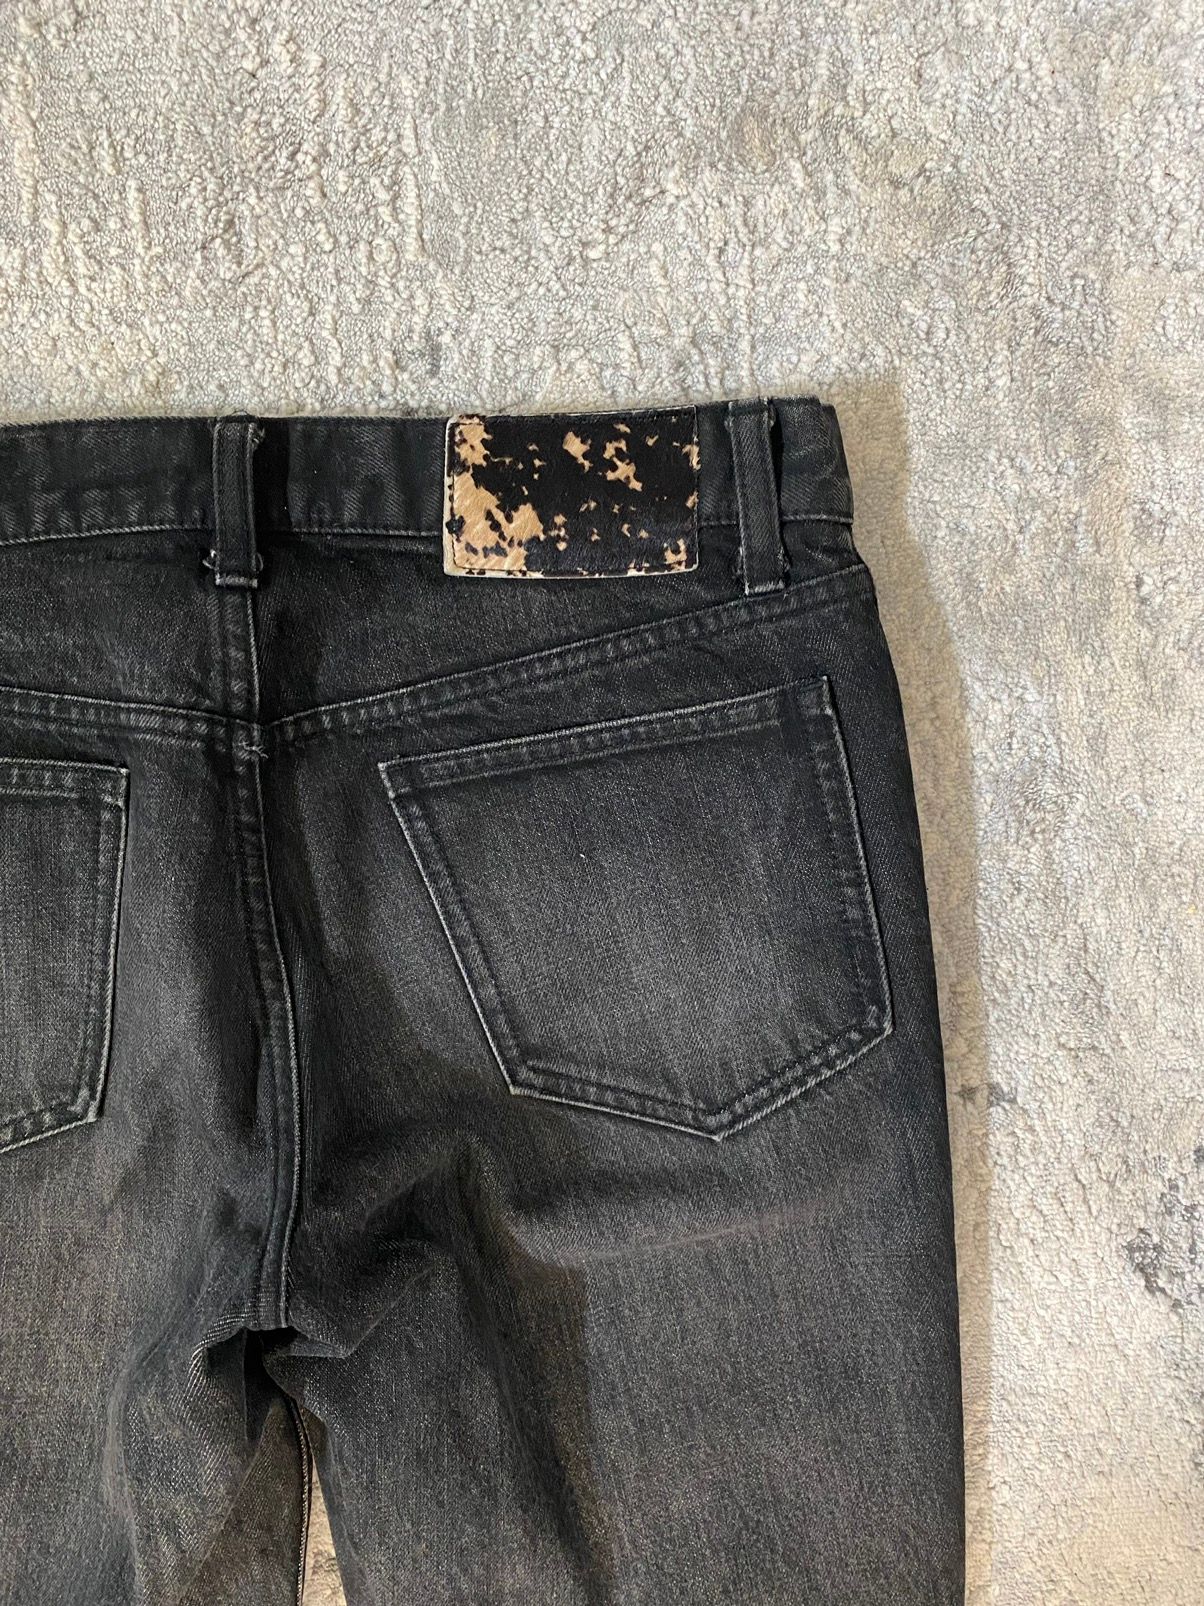 Shellac [SOLD]Shellac Faded Black Bootcut Jeans Size US 30 / EU 46 - 2 Preview